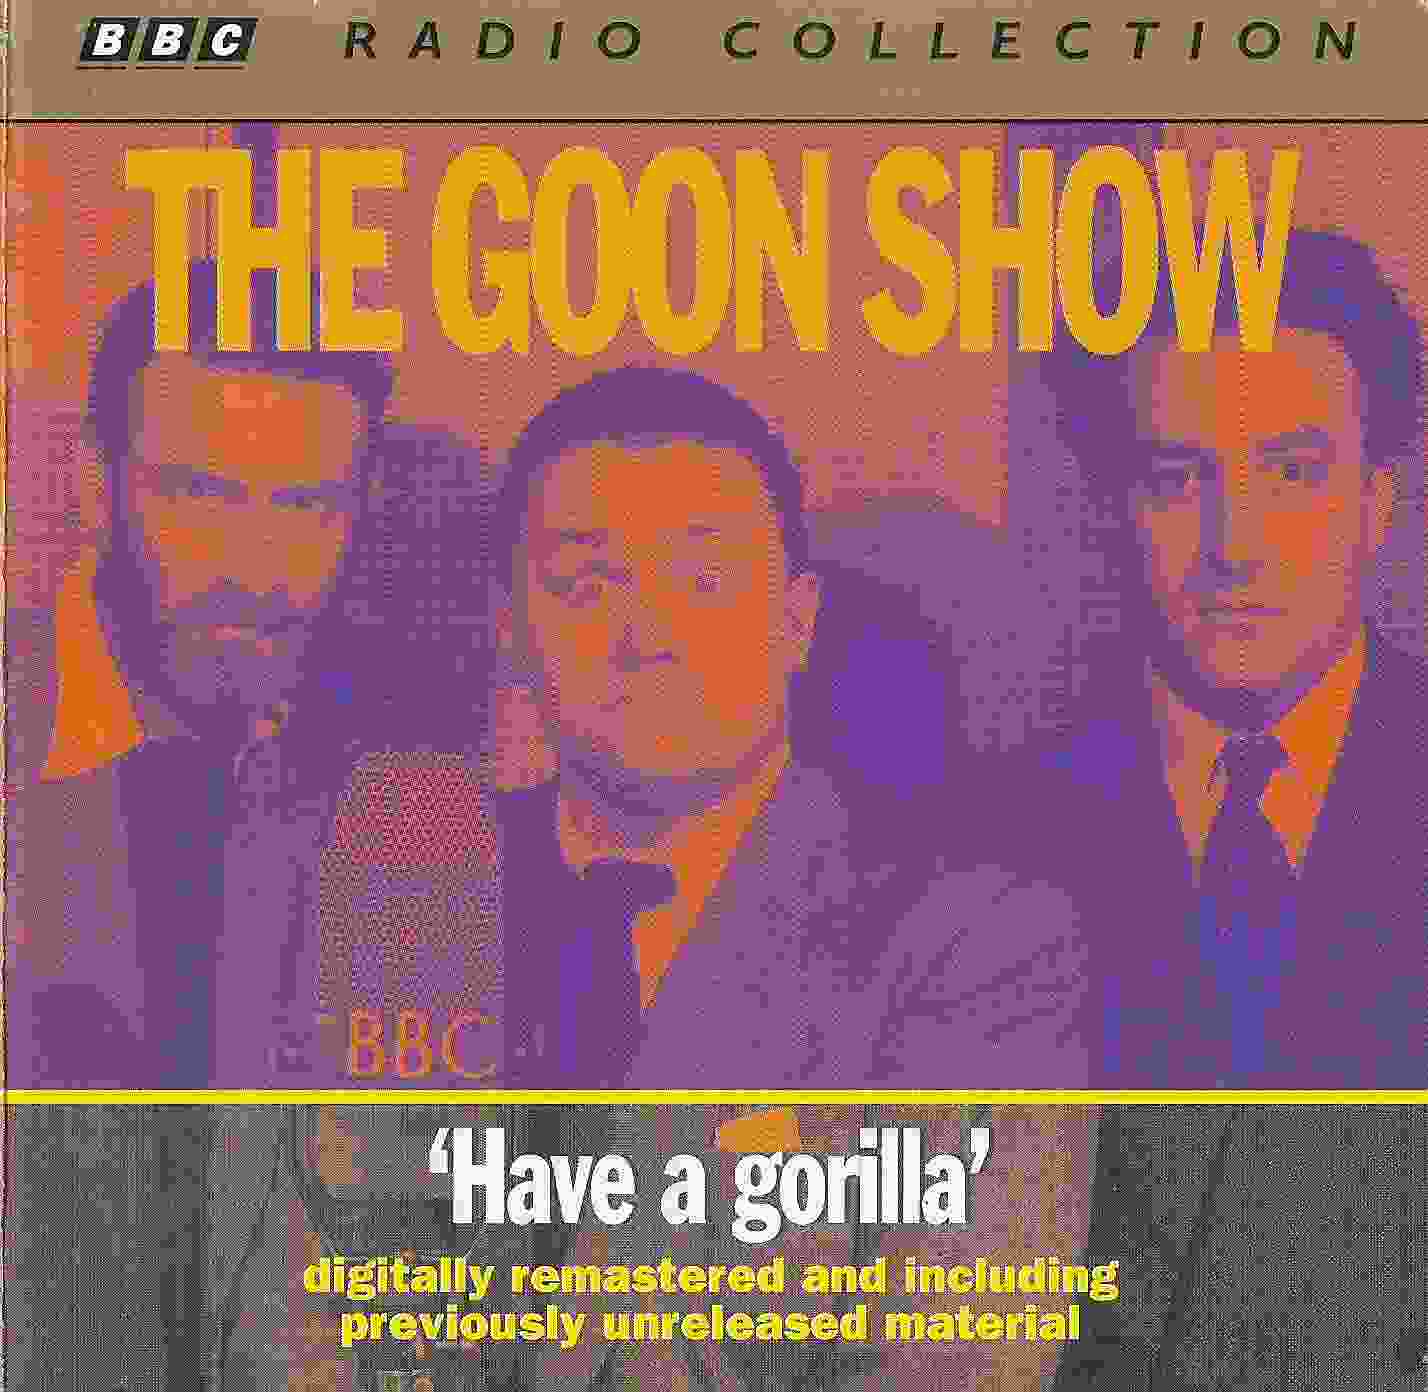 Picture of The Goon show 6 - Have a gorilla by artist Spike Milligan / Larry Stephens / Maurice Wiltshire from the BBC cds - Records and Tapes library